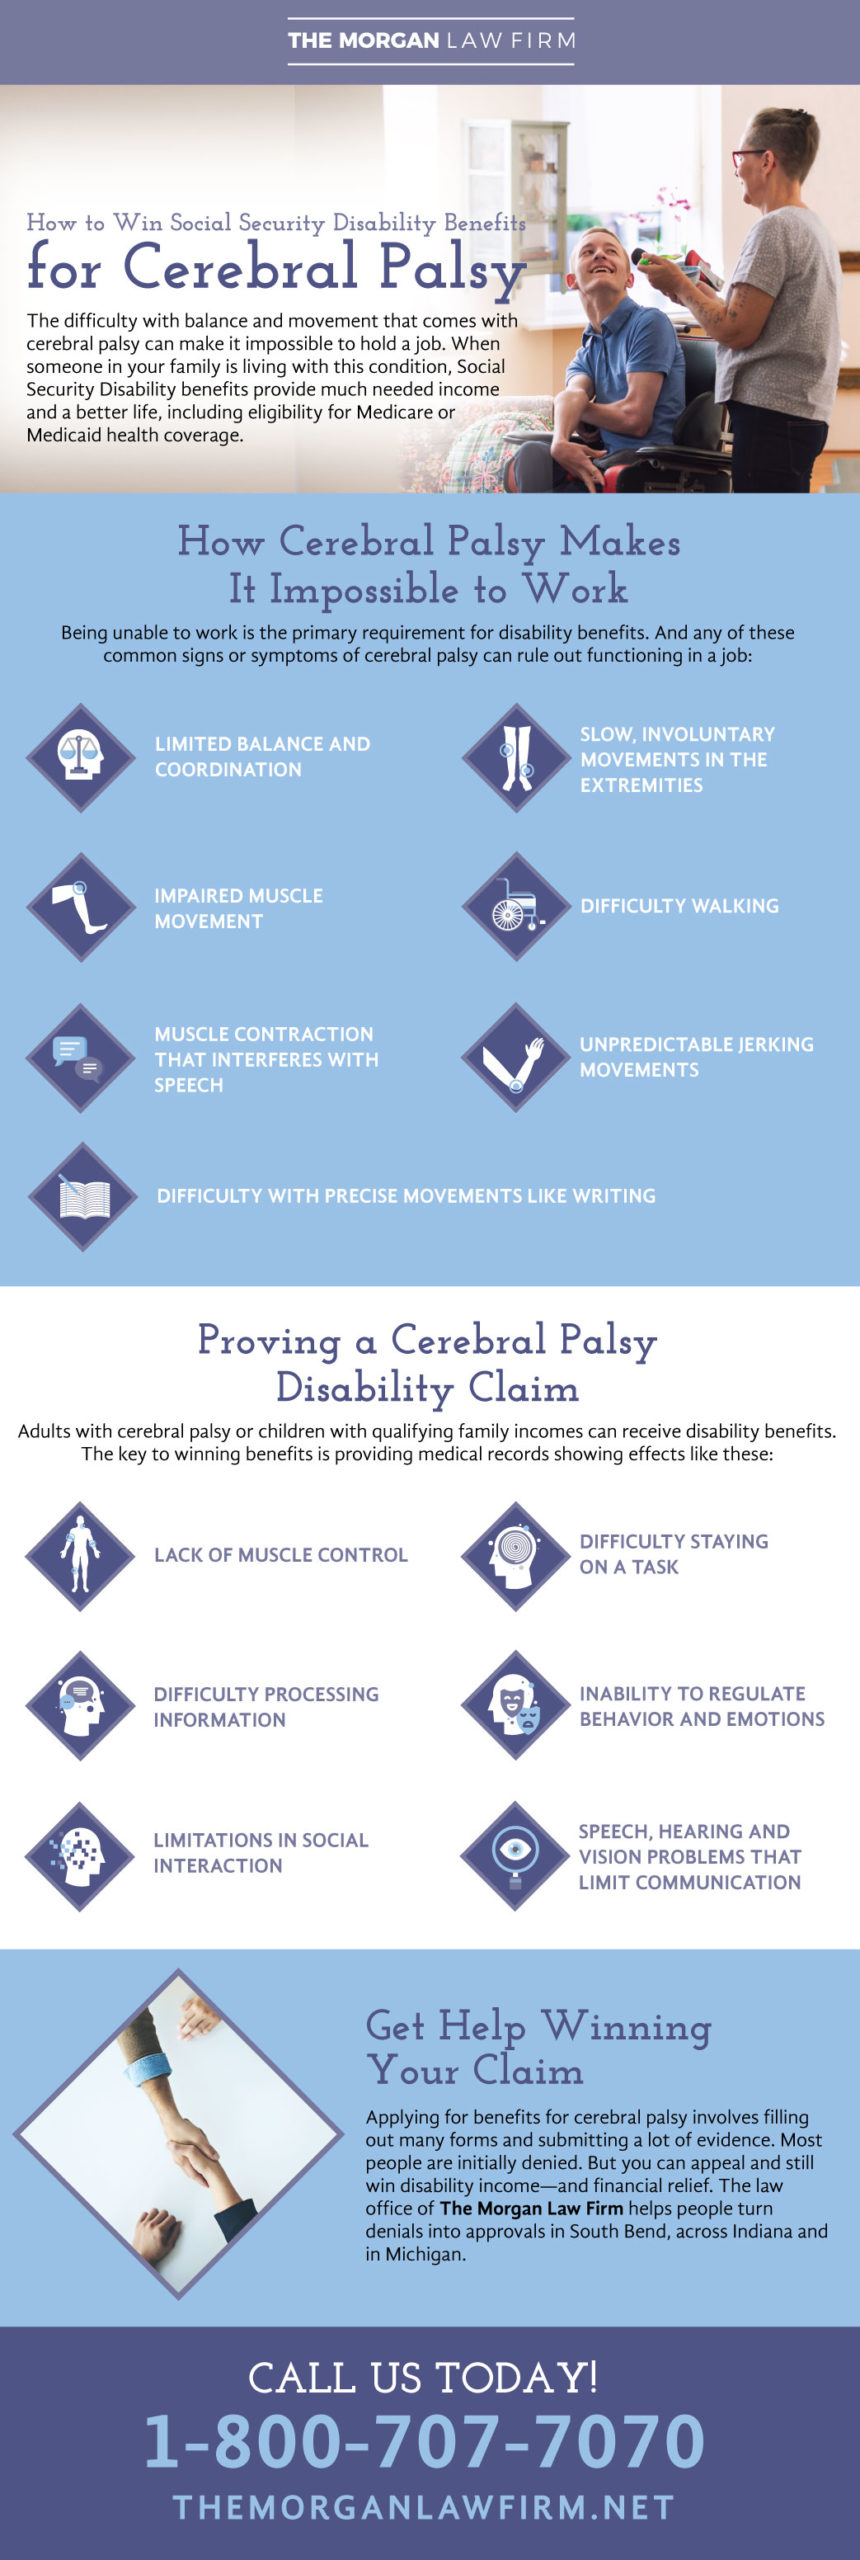 An infographic for individuals suffering from cerebral palsy that are looking to receive social security disability benefits.